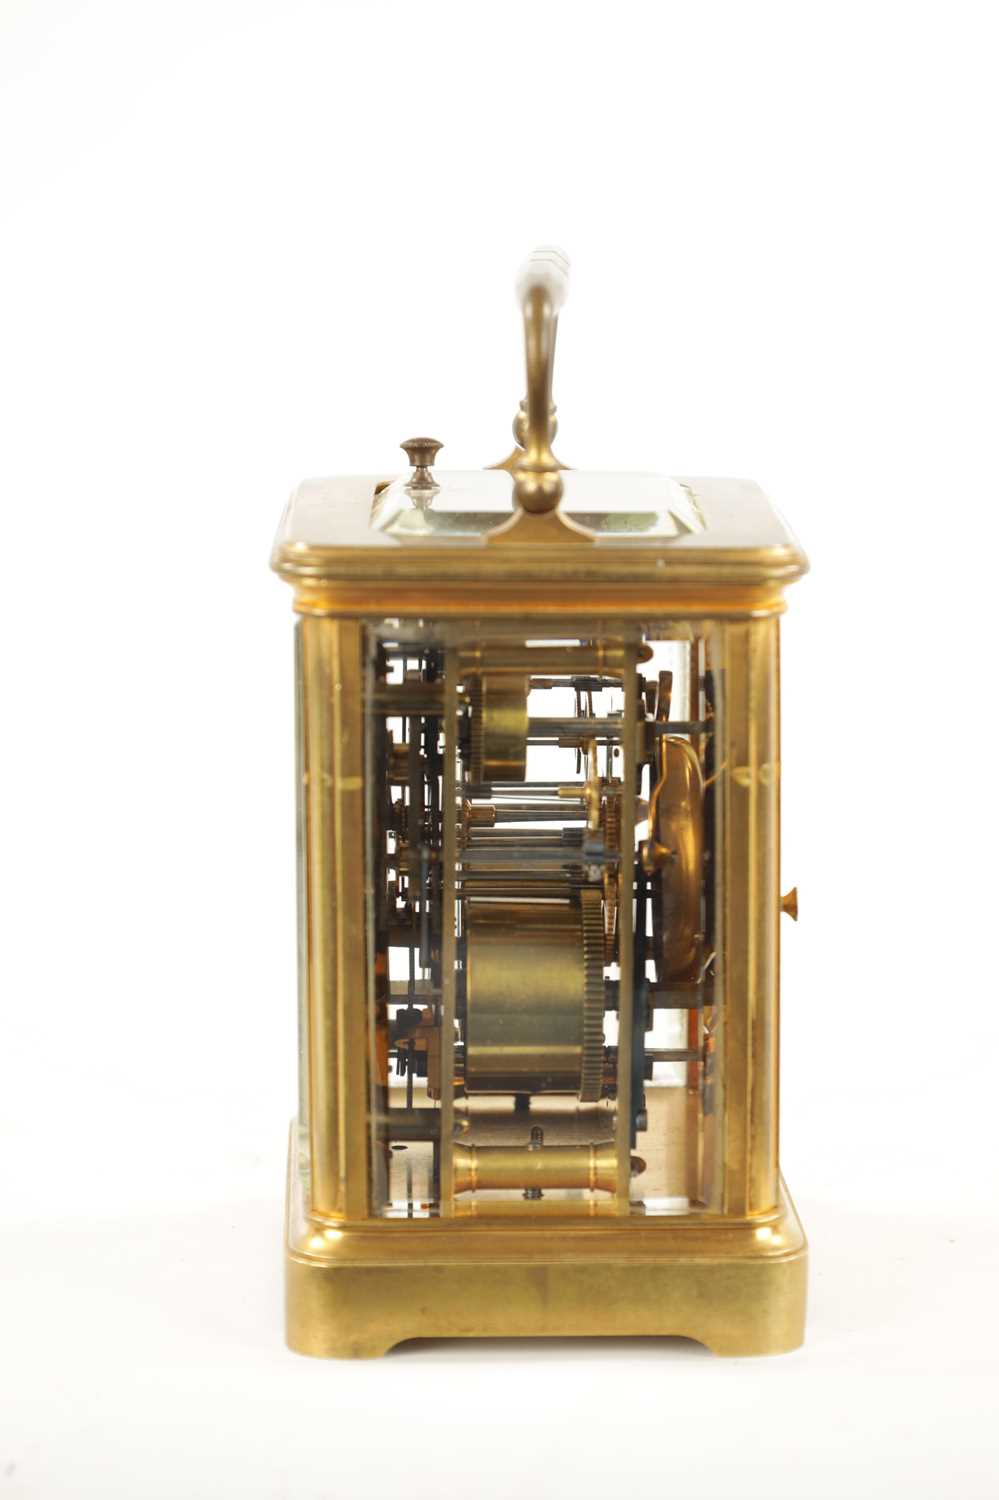 PAUL GARNIER, PARIS. A 19TH CENTURY FRENCH REPEATING CARRIAGE CLOCK - Image 4 of 9